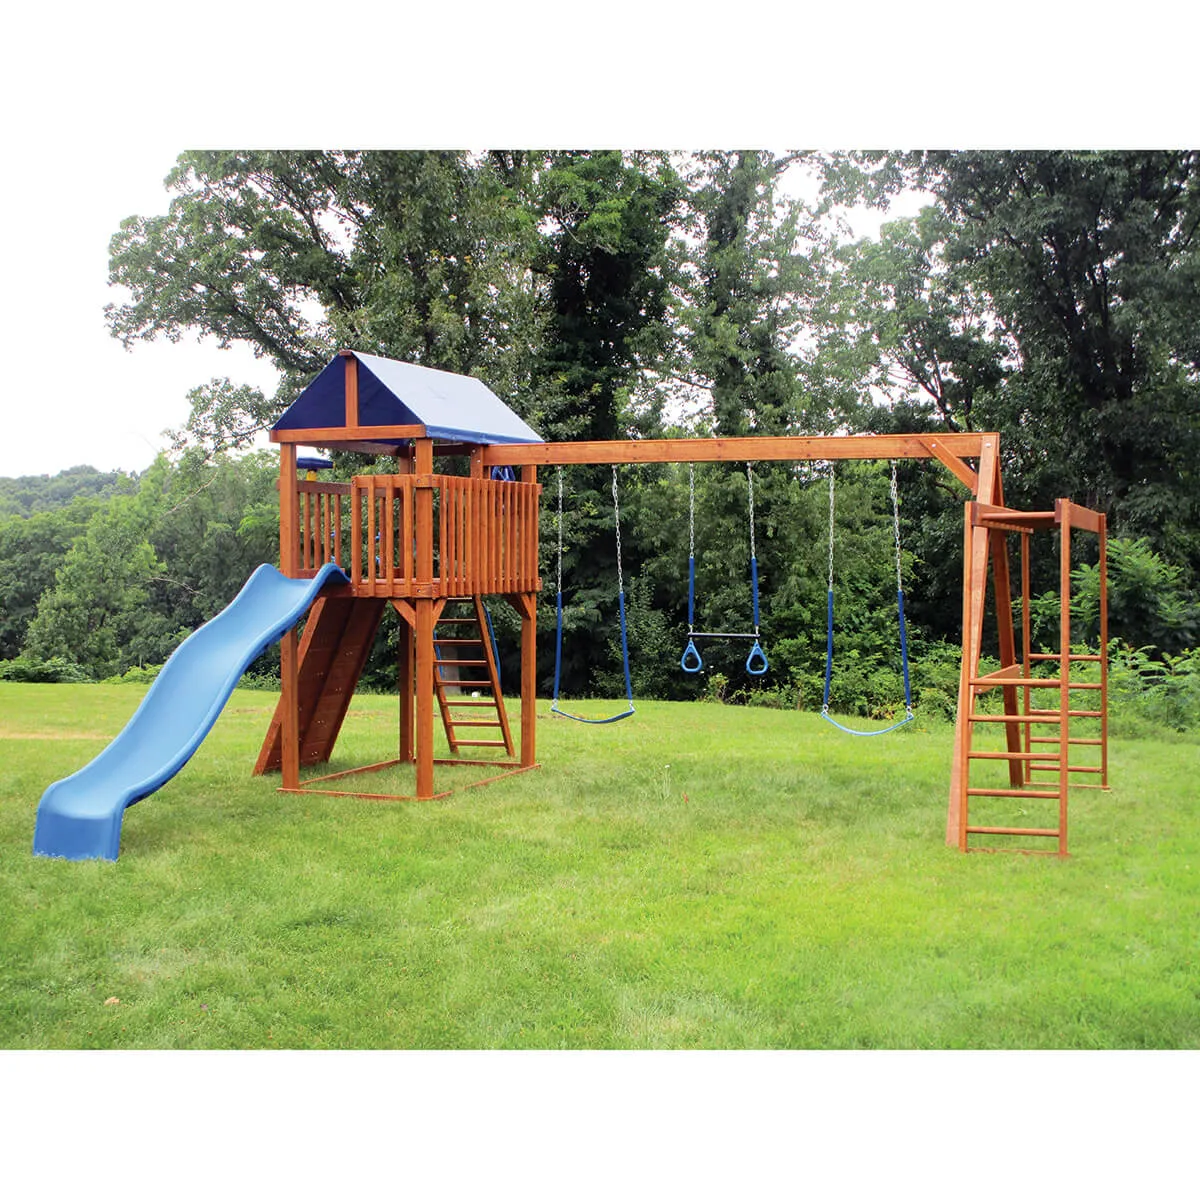 CL#519 Wooden Play Set